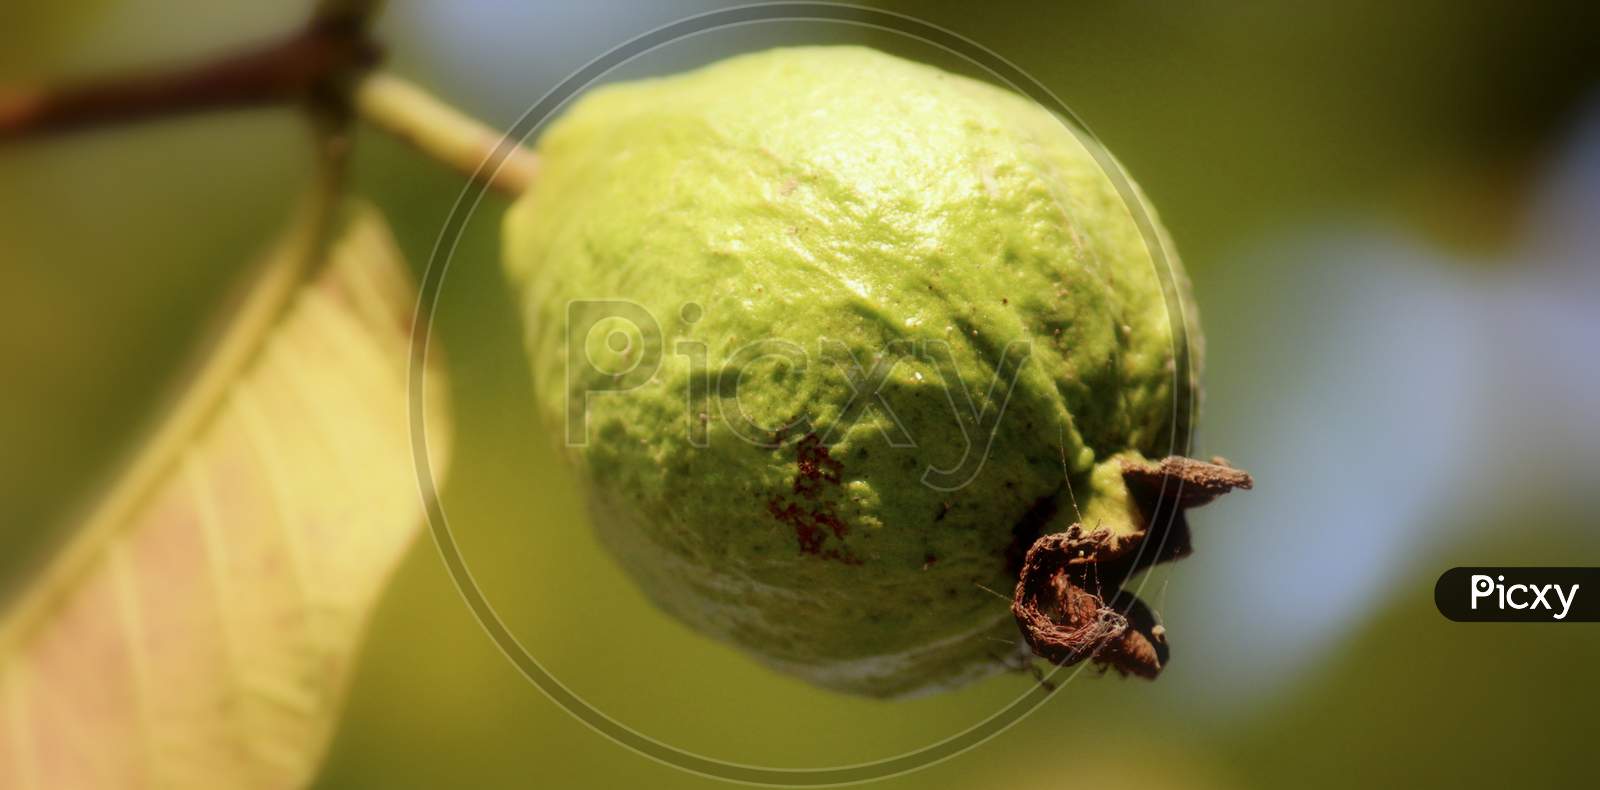 Tropical Fruit Guava - Fresh Guava On Trees, Fresh Green Guava In The Garden. Small Green Guava Fruit Hanging On Tree.